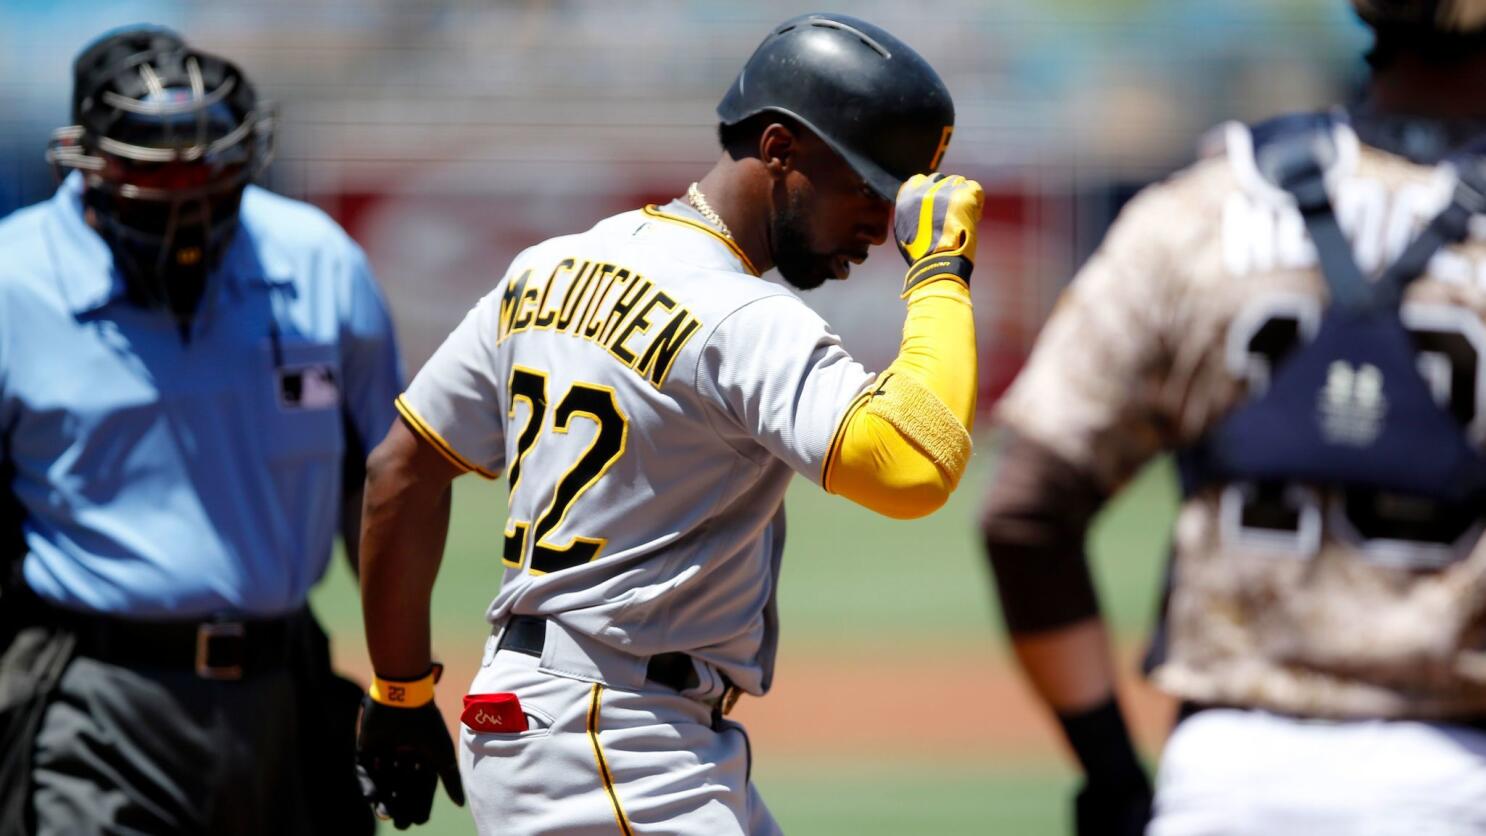 Pittsburgh Pirates Star Andrew McCutchen on the Hurt of Being